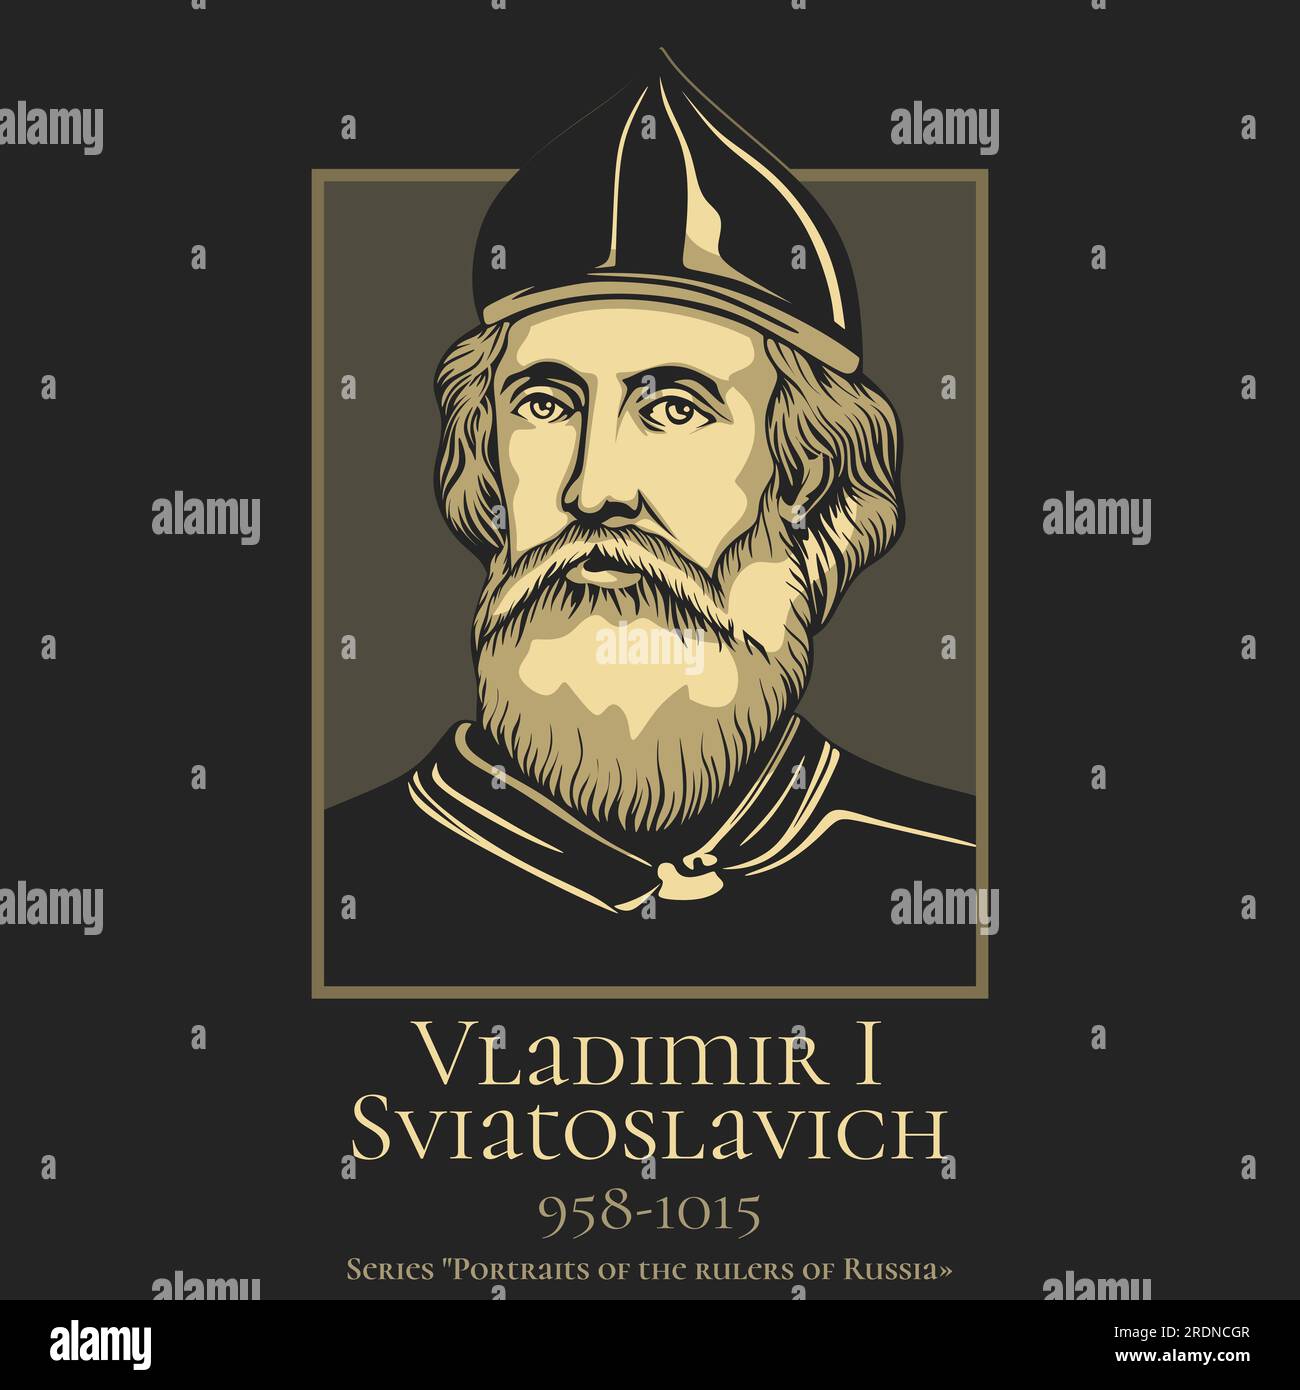 Portrait of the rulers of Russia. Vladimir I Sviatoslavich (958-1015) was Prince of Novgorod, Grand Prince of Kiev, and ruler of Kievan Rus from 980 t Stock Vector